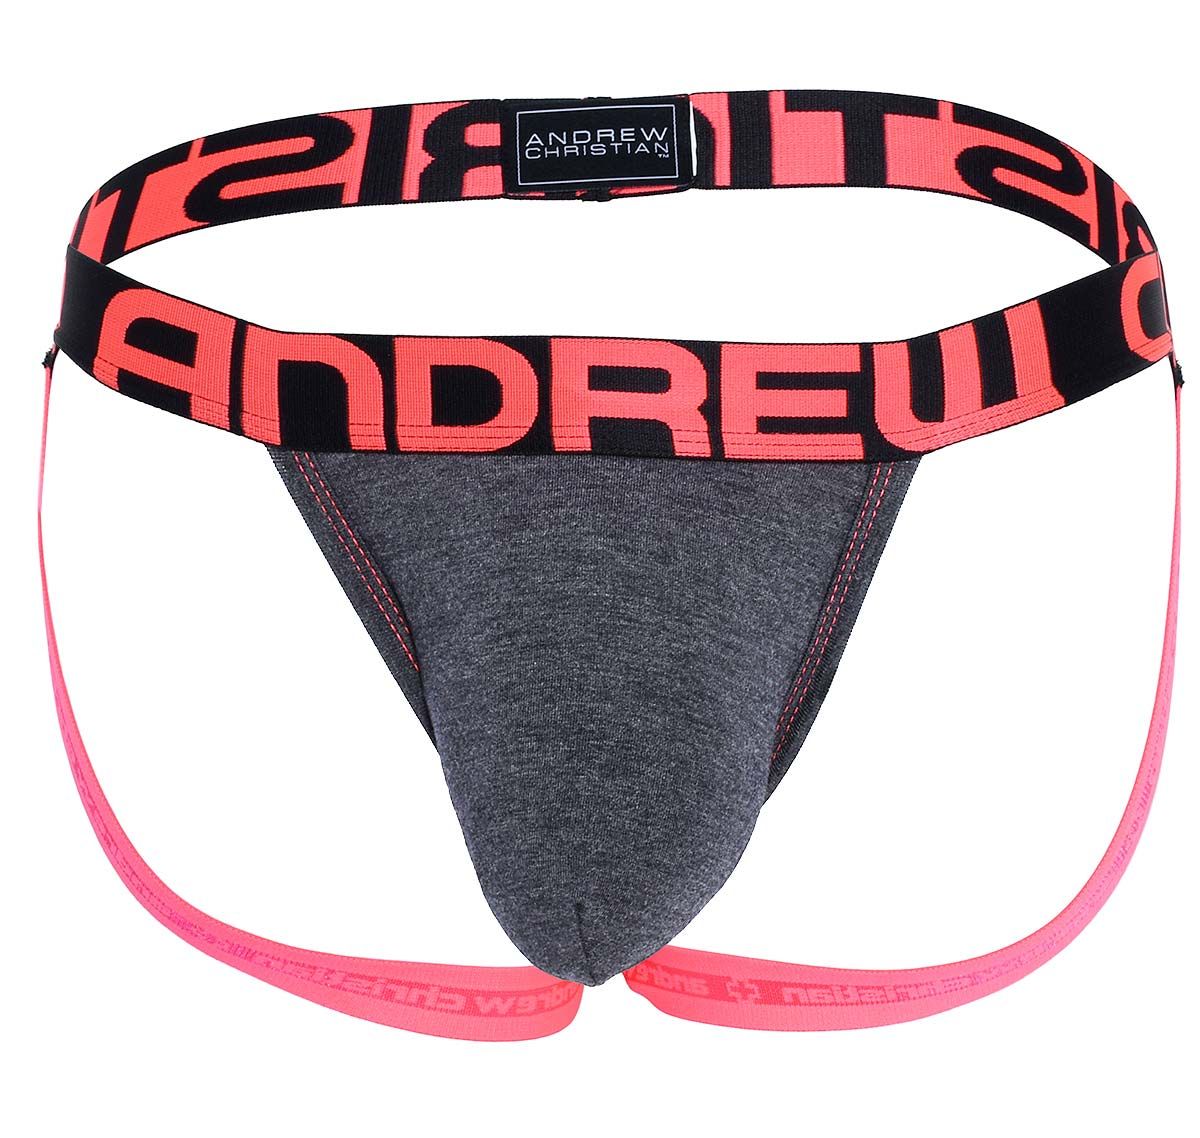 Andrew Christian Suspensorio ALMOST NAKED BAMBOO JOCK 91698, gris